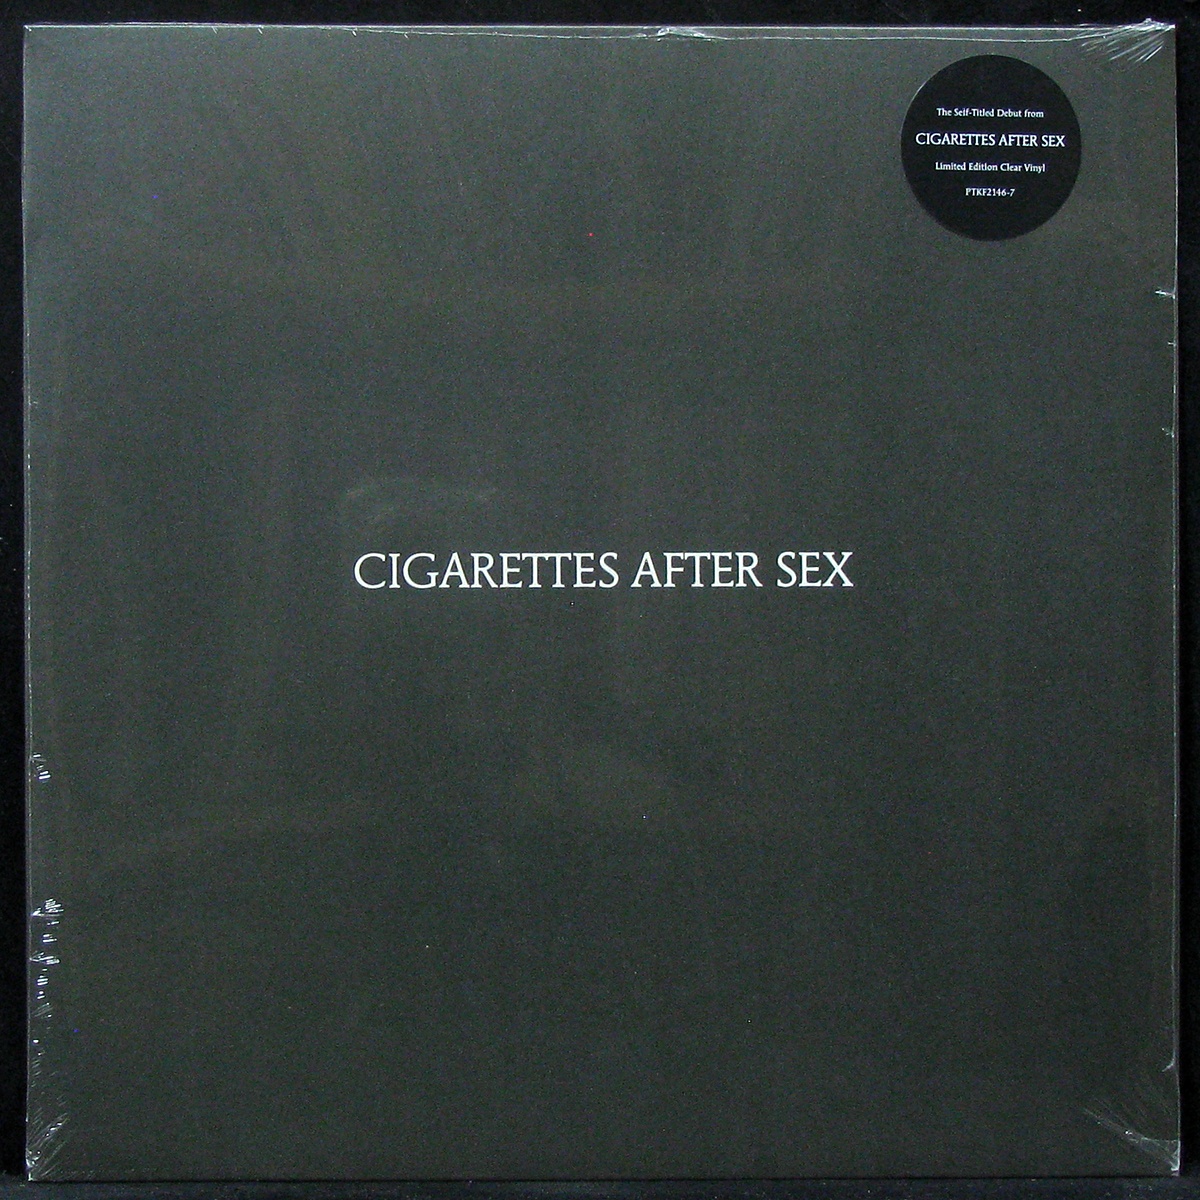 Пластинка Cigarettes After Sex Cigarettes After Sex Coloured Vinyl 2022 Ssss арт 305951 5275